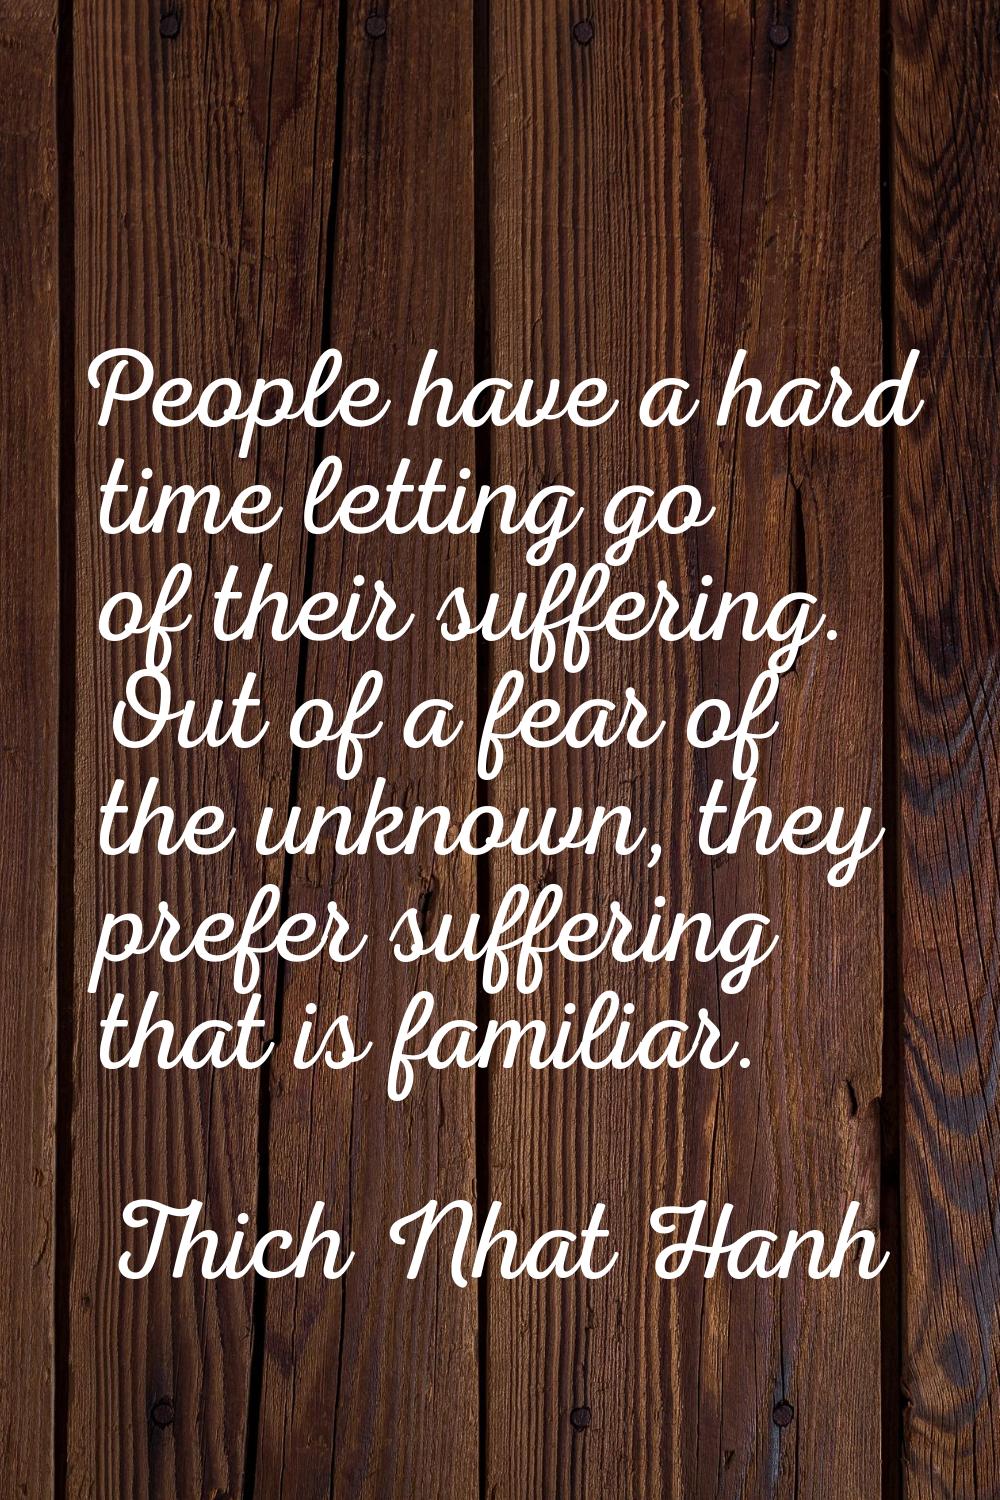 People have a hard time letting go of their suffering. Out of a fear of the unknown, they prefer su